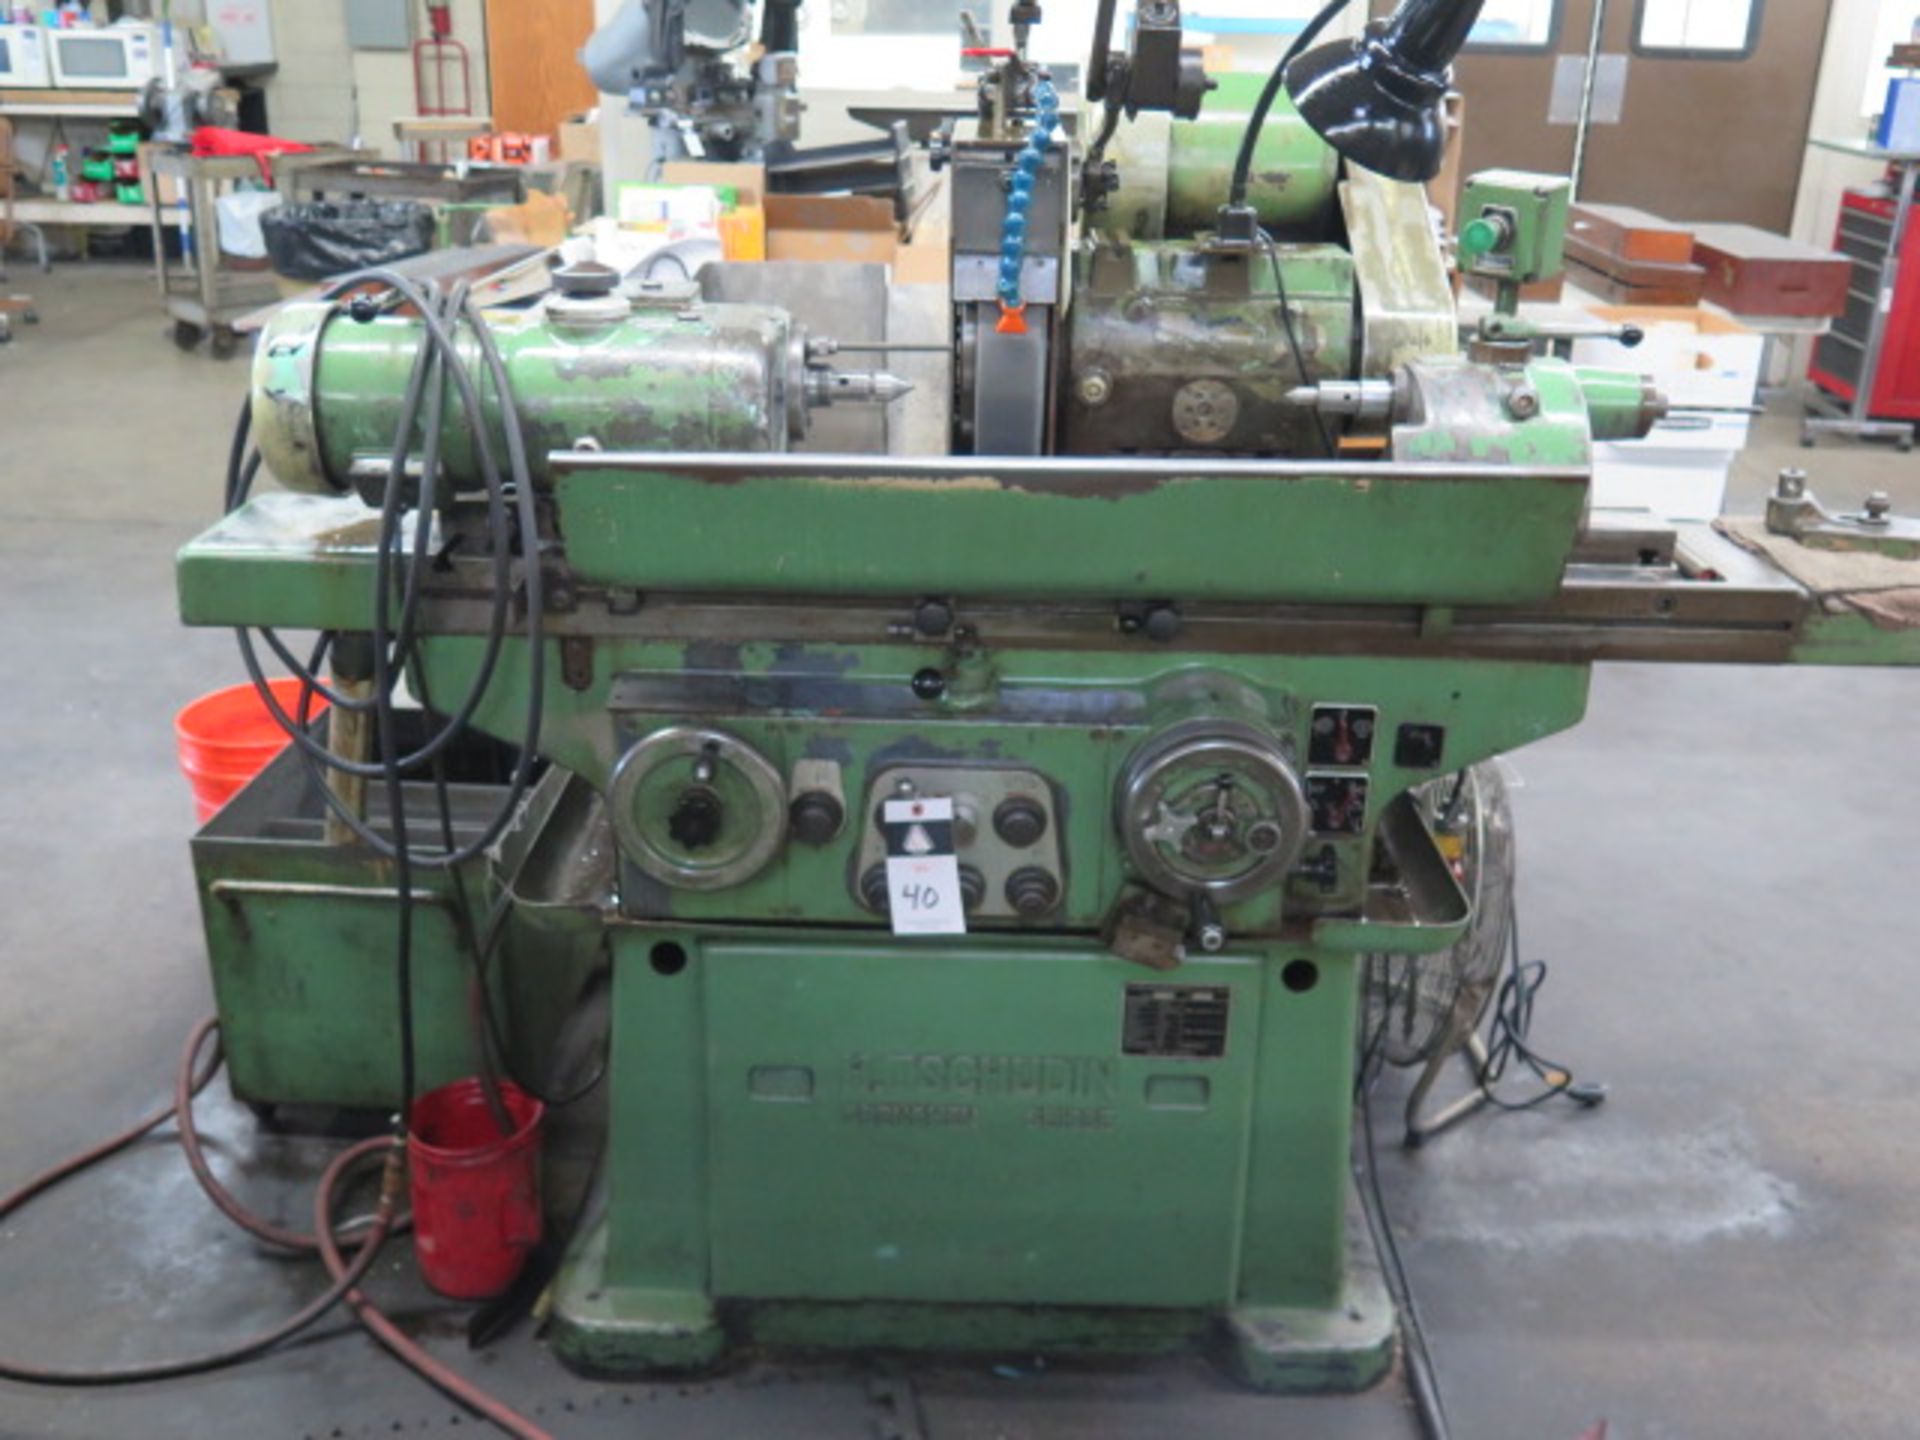 H. Tschudin HTG-400 Cylindrical Grinder s/n 711485 w/ Motorized Work Head, Tailstock, SOLD AS IS